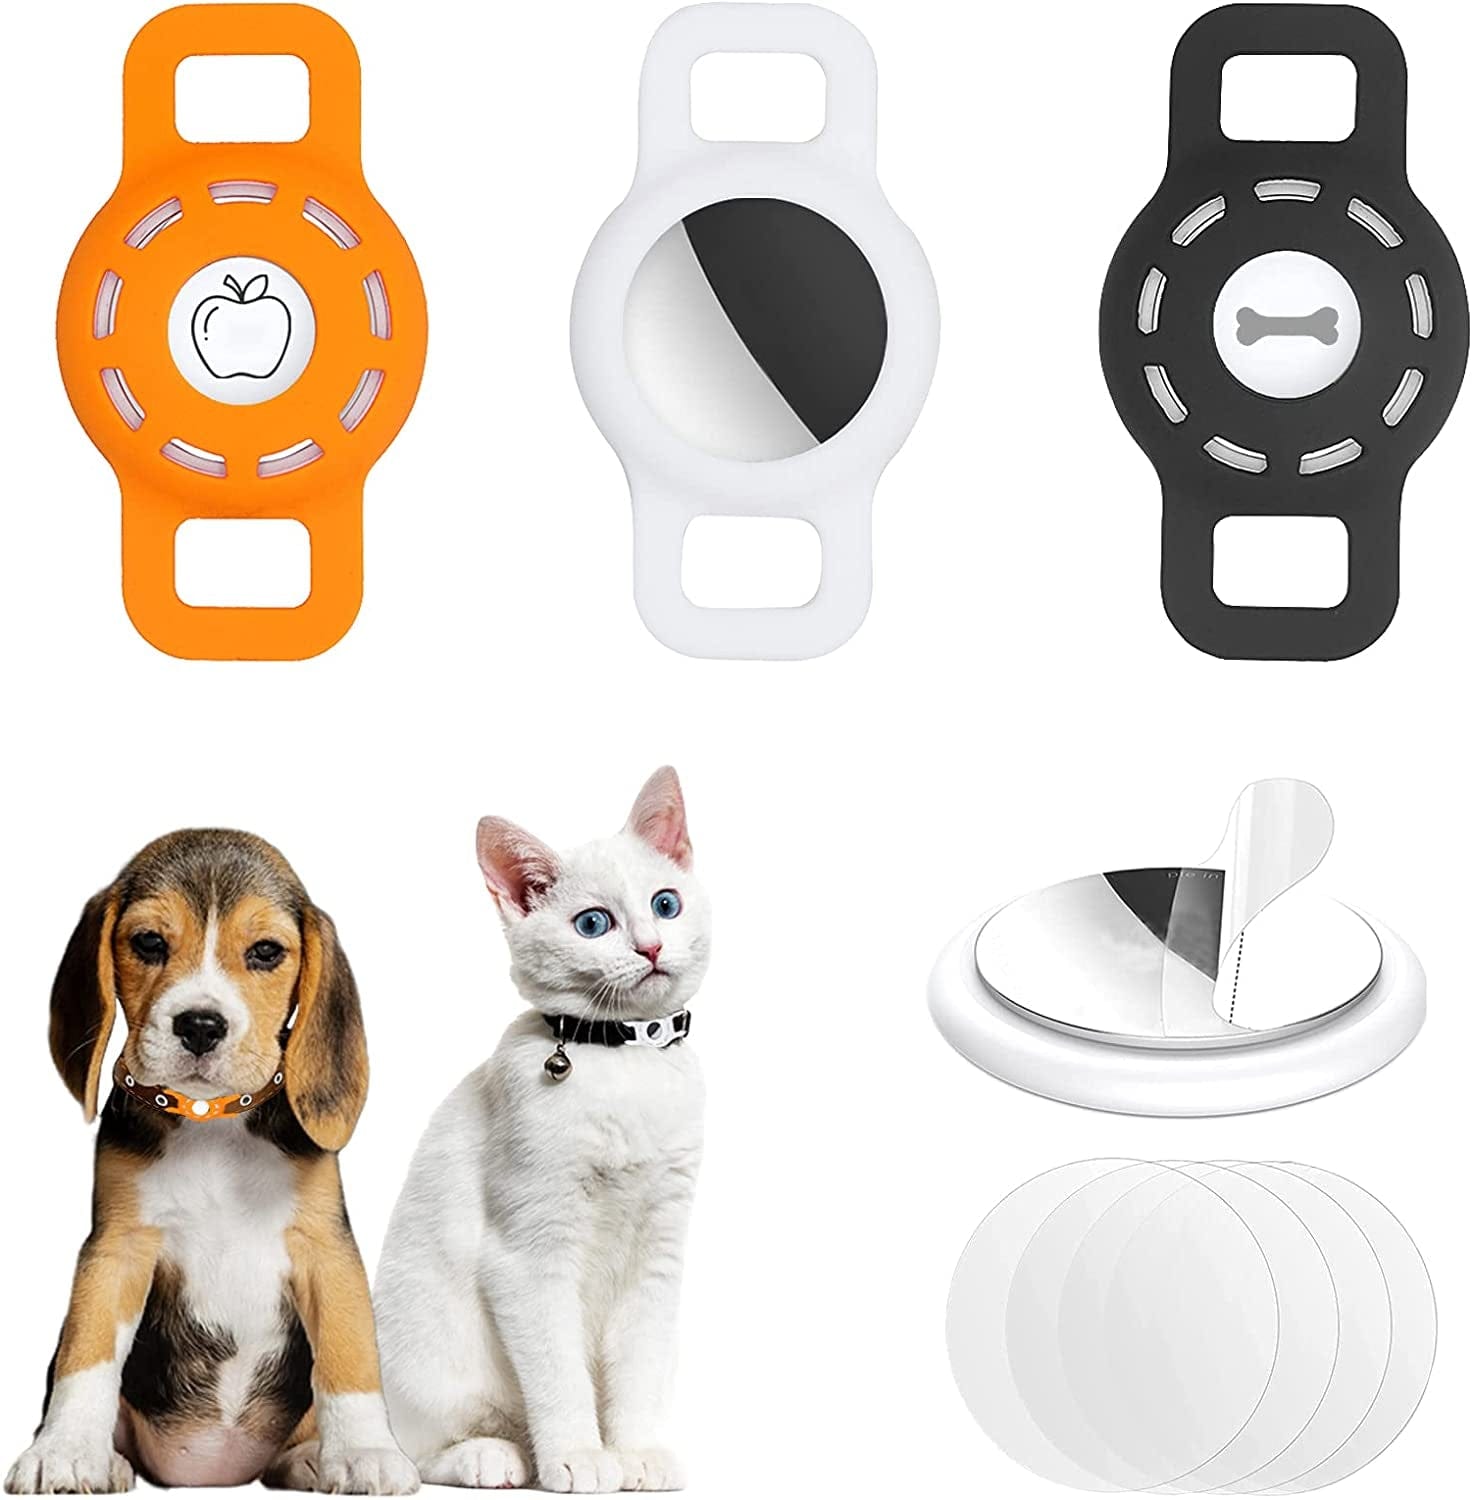 3-Pack Airtag Cat Collar Holder for Apple Airtag 2021, Silicone Airtag Protective Case for Puppy Collar, Anti-Lost Airtag Dog Collar Holder with Screen Protectors Electronics > GPS Accessories > GPS Cases Fretime Black & Orange & White Suitable for collar up to 0.7 inch wide 